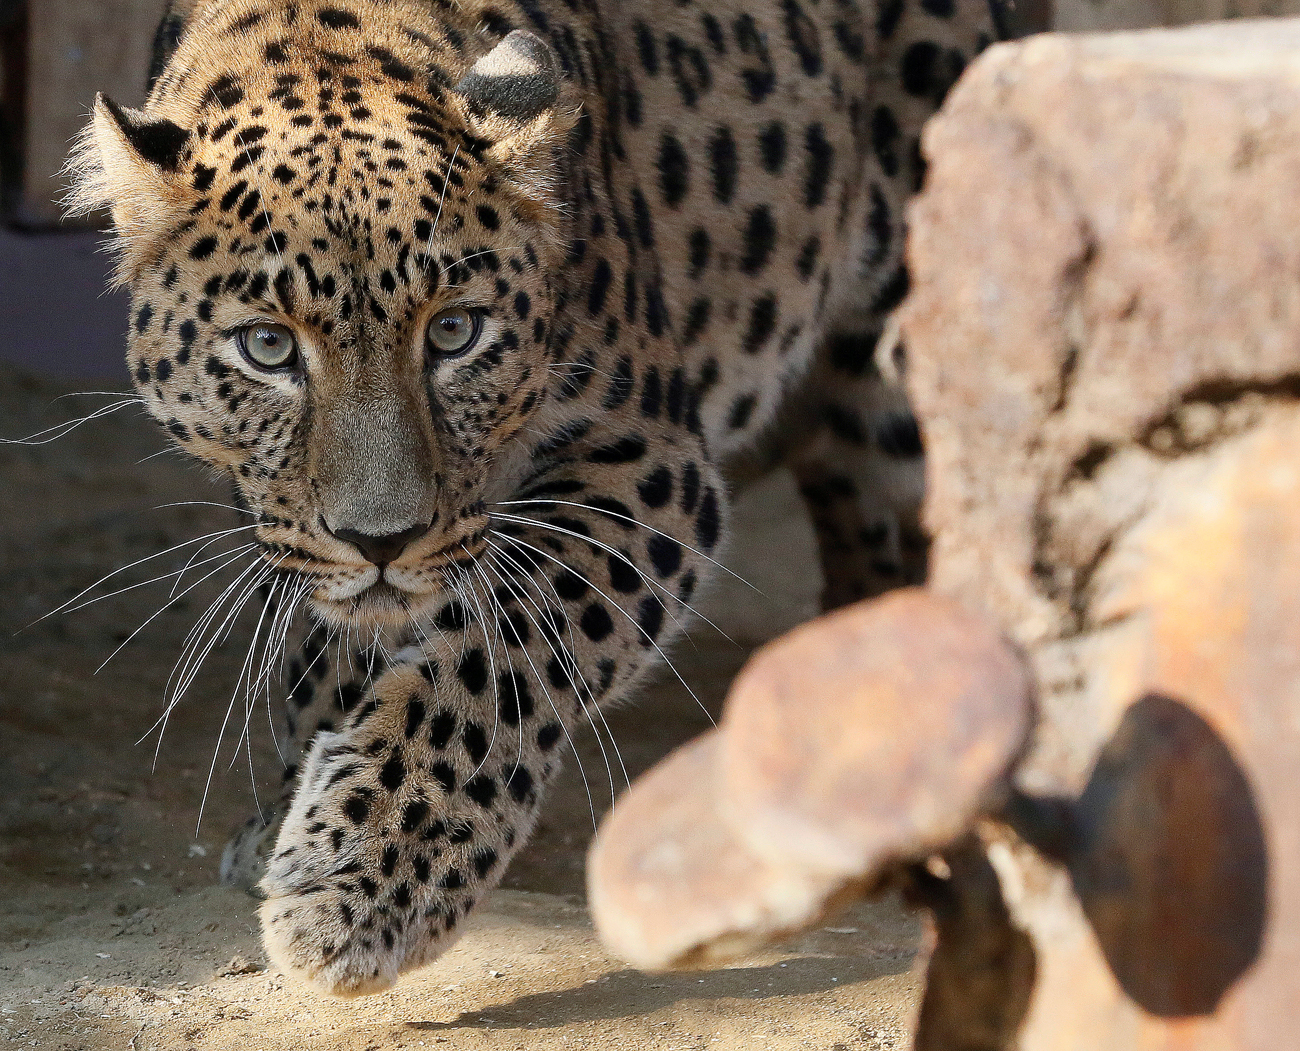 Amur leopard or Far Eastern leopard named Kirin, a 7-year-old male born in the Prague Zoo and transported to Krasnoyarsk in August, walks at its new enclosure after a quarantine, at the Royev Ruchey Zoo on the suburbs of the Siberian city of Krasnoyarsk, Russia